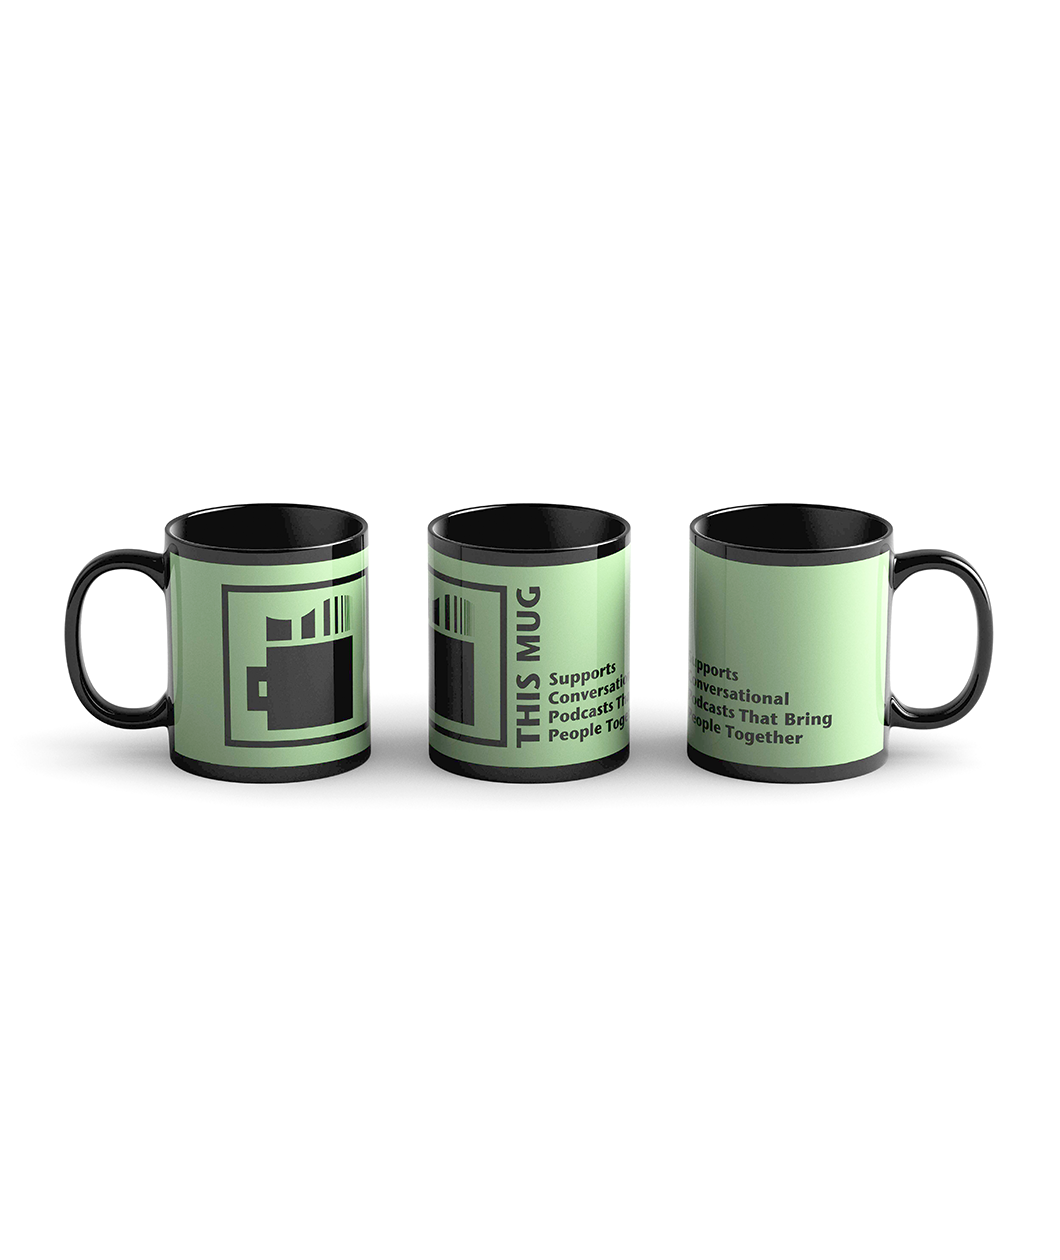 This Mug Supports Conversational Podcasts